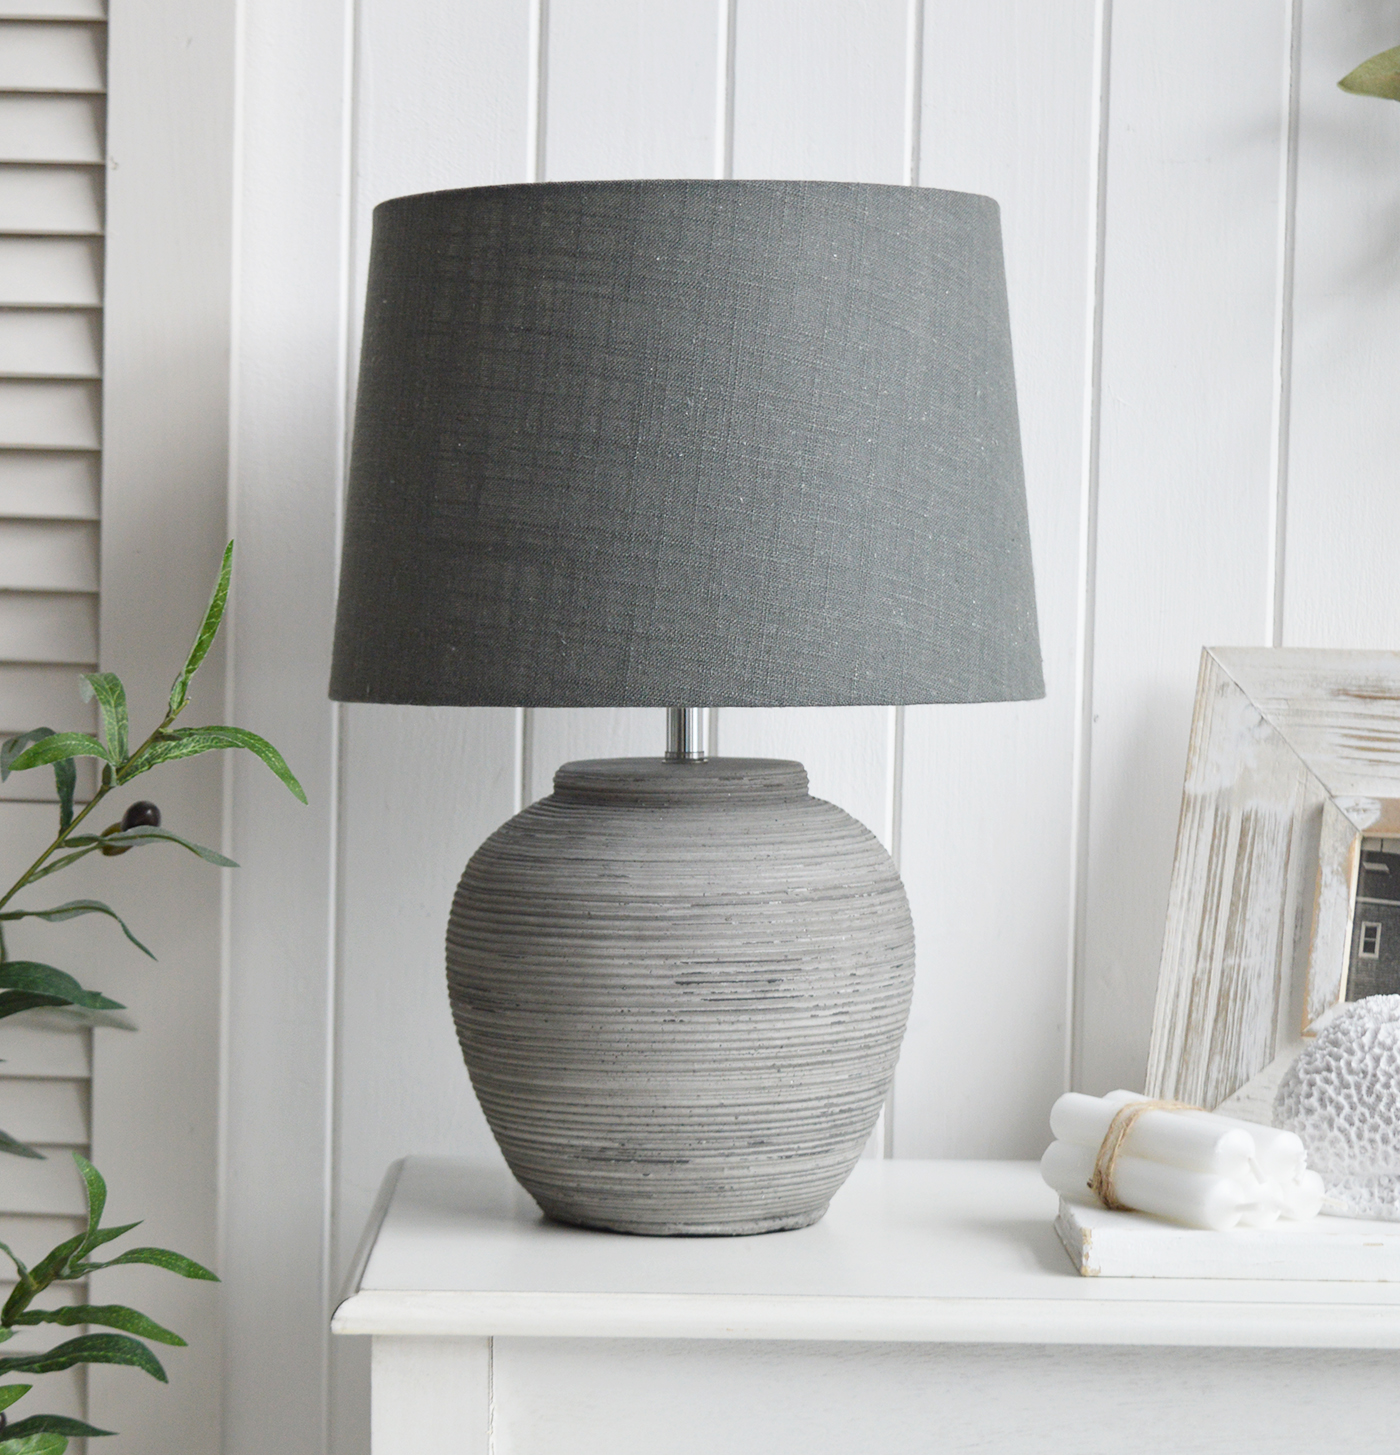 rey Stone Lamp - ideal in a coastal interior for Beach House and Hamptons style